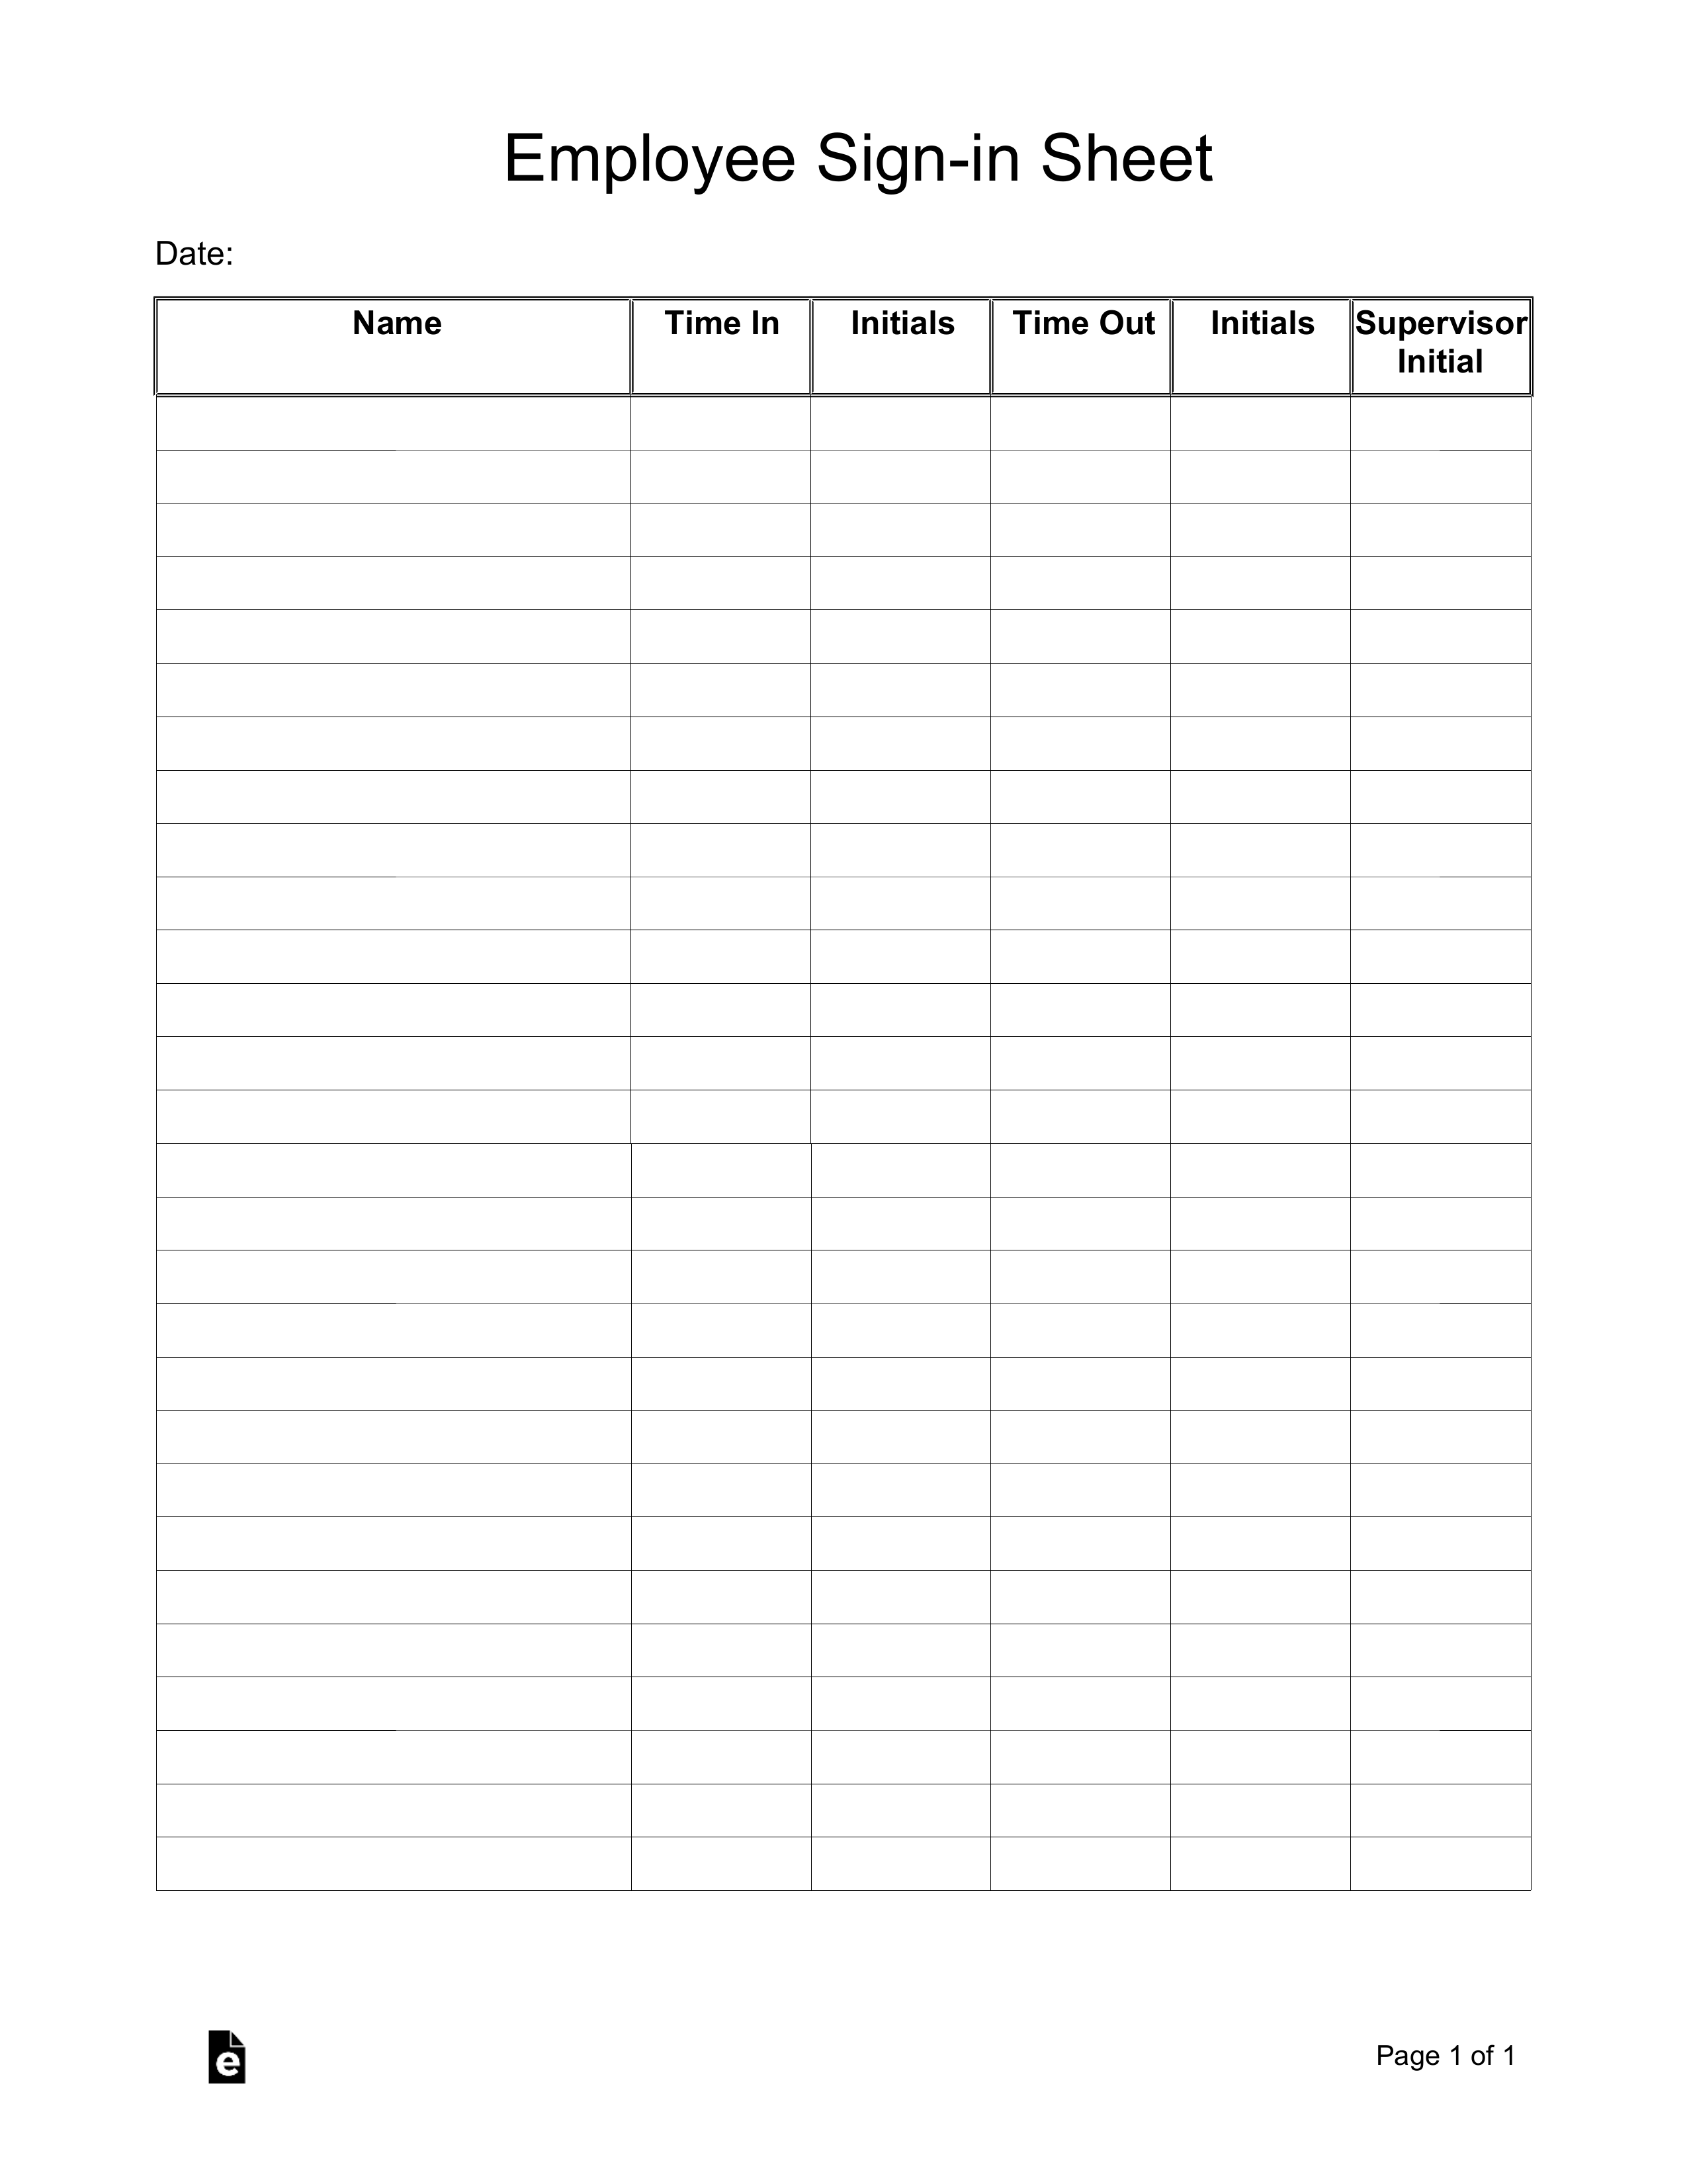 Employee Sign In And Out Sheet Template from eforms.com